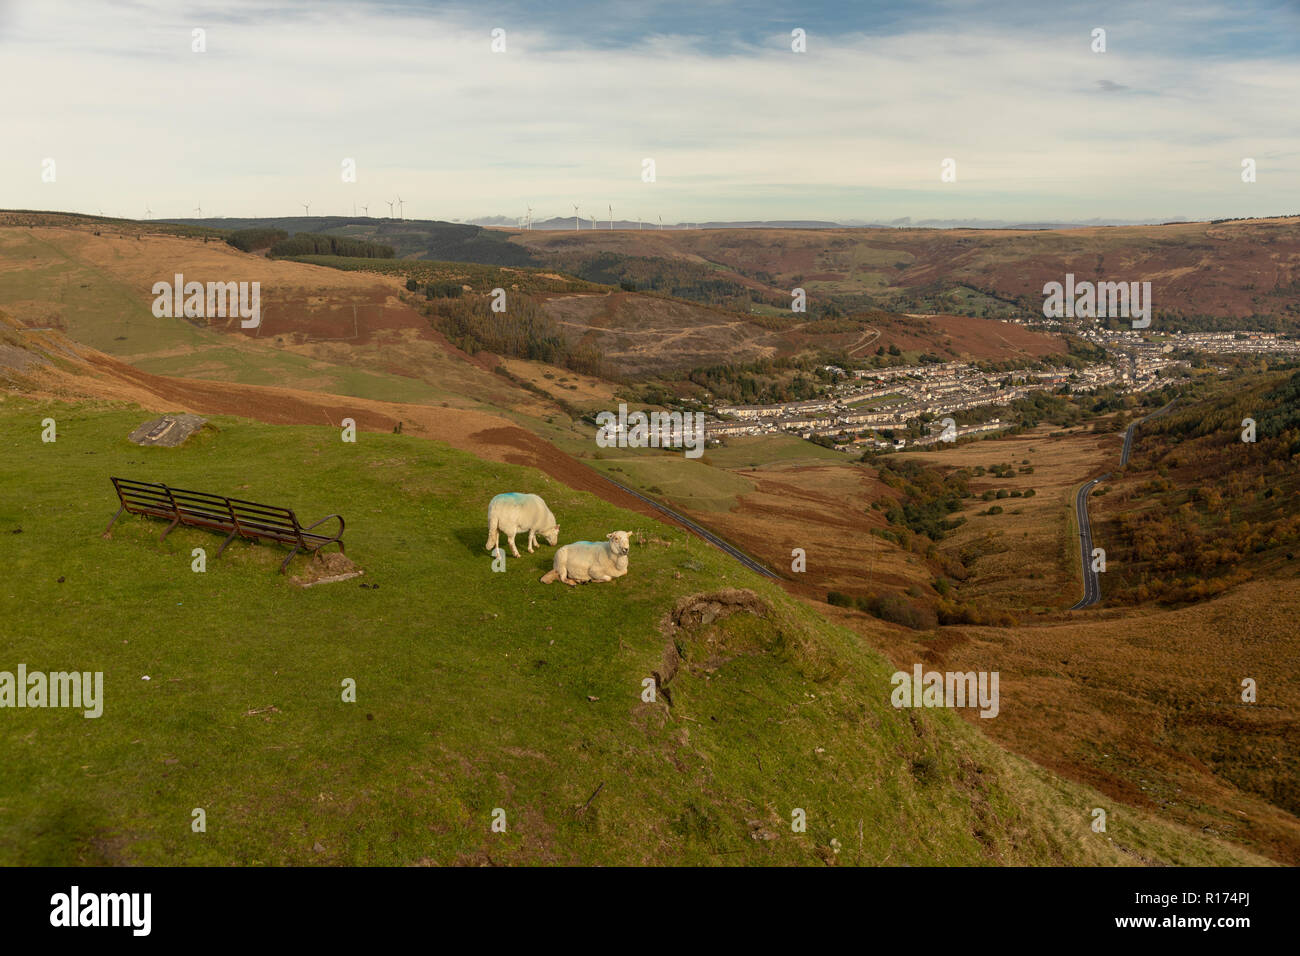 Sheep gather at the Bwlch y Clawdd mountain pass near Treorchy in the Rhondda Valleys, South Wales, UK. Stock Photo